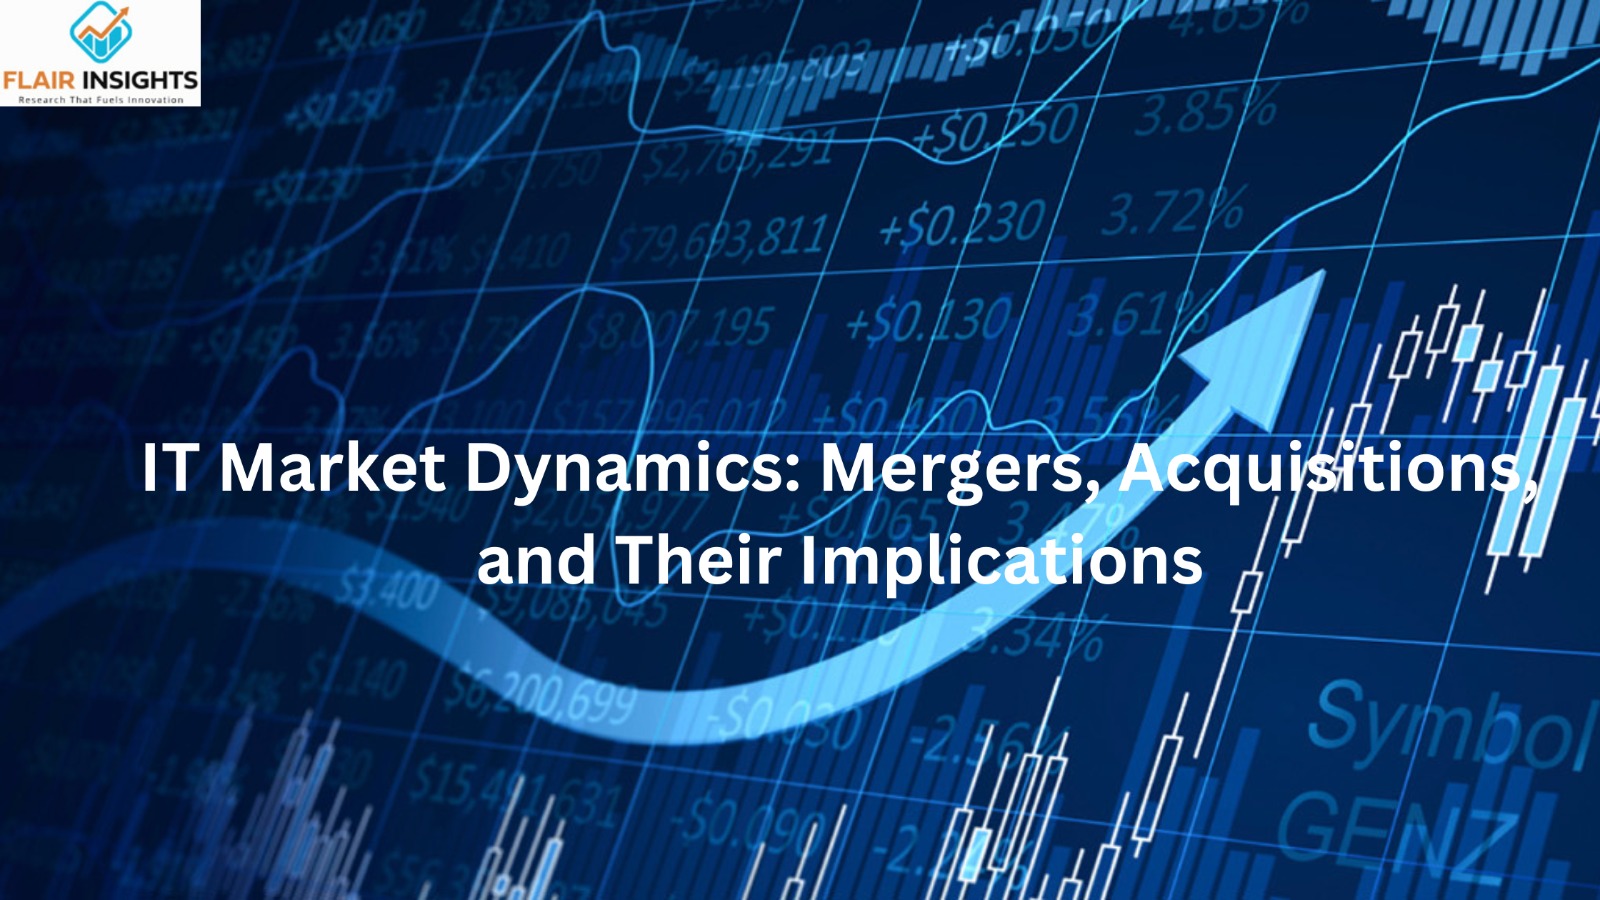 IT Market Dynamics: Mergers, Acquisitions, and Their Implications